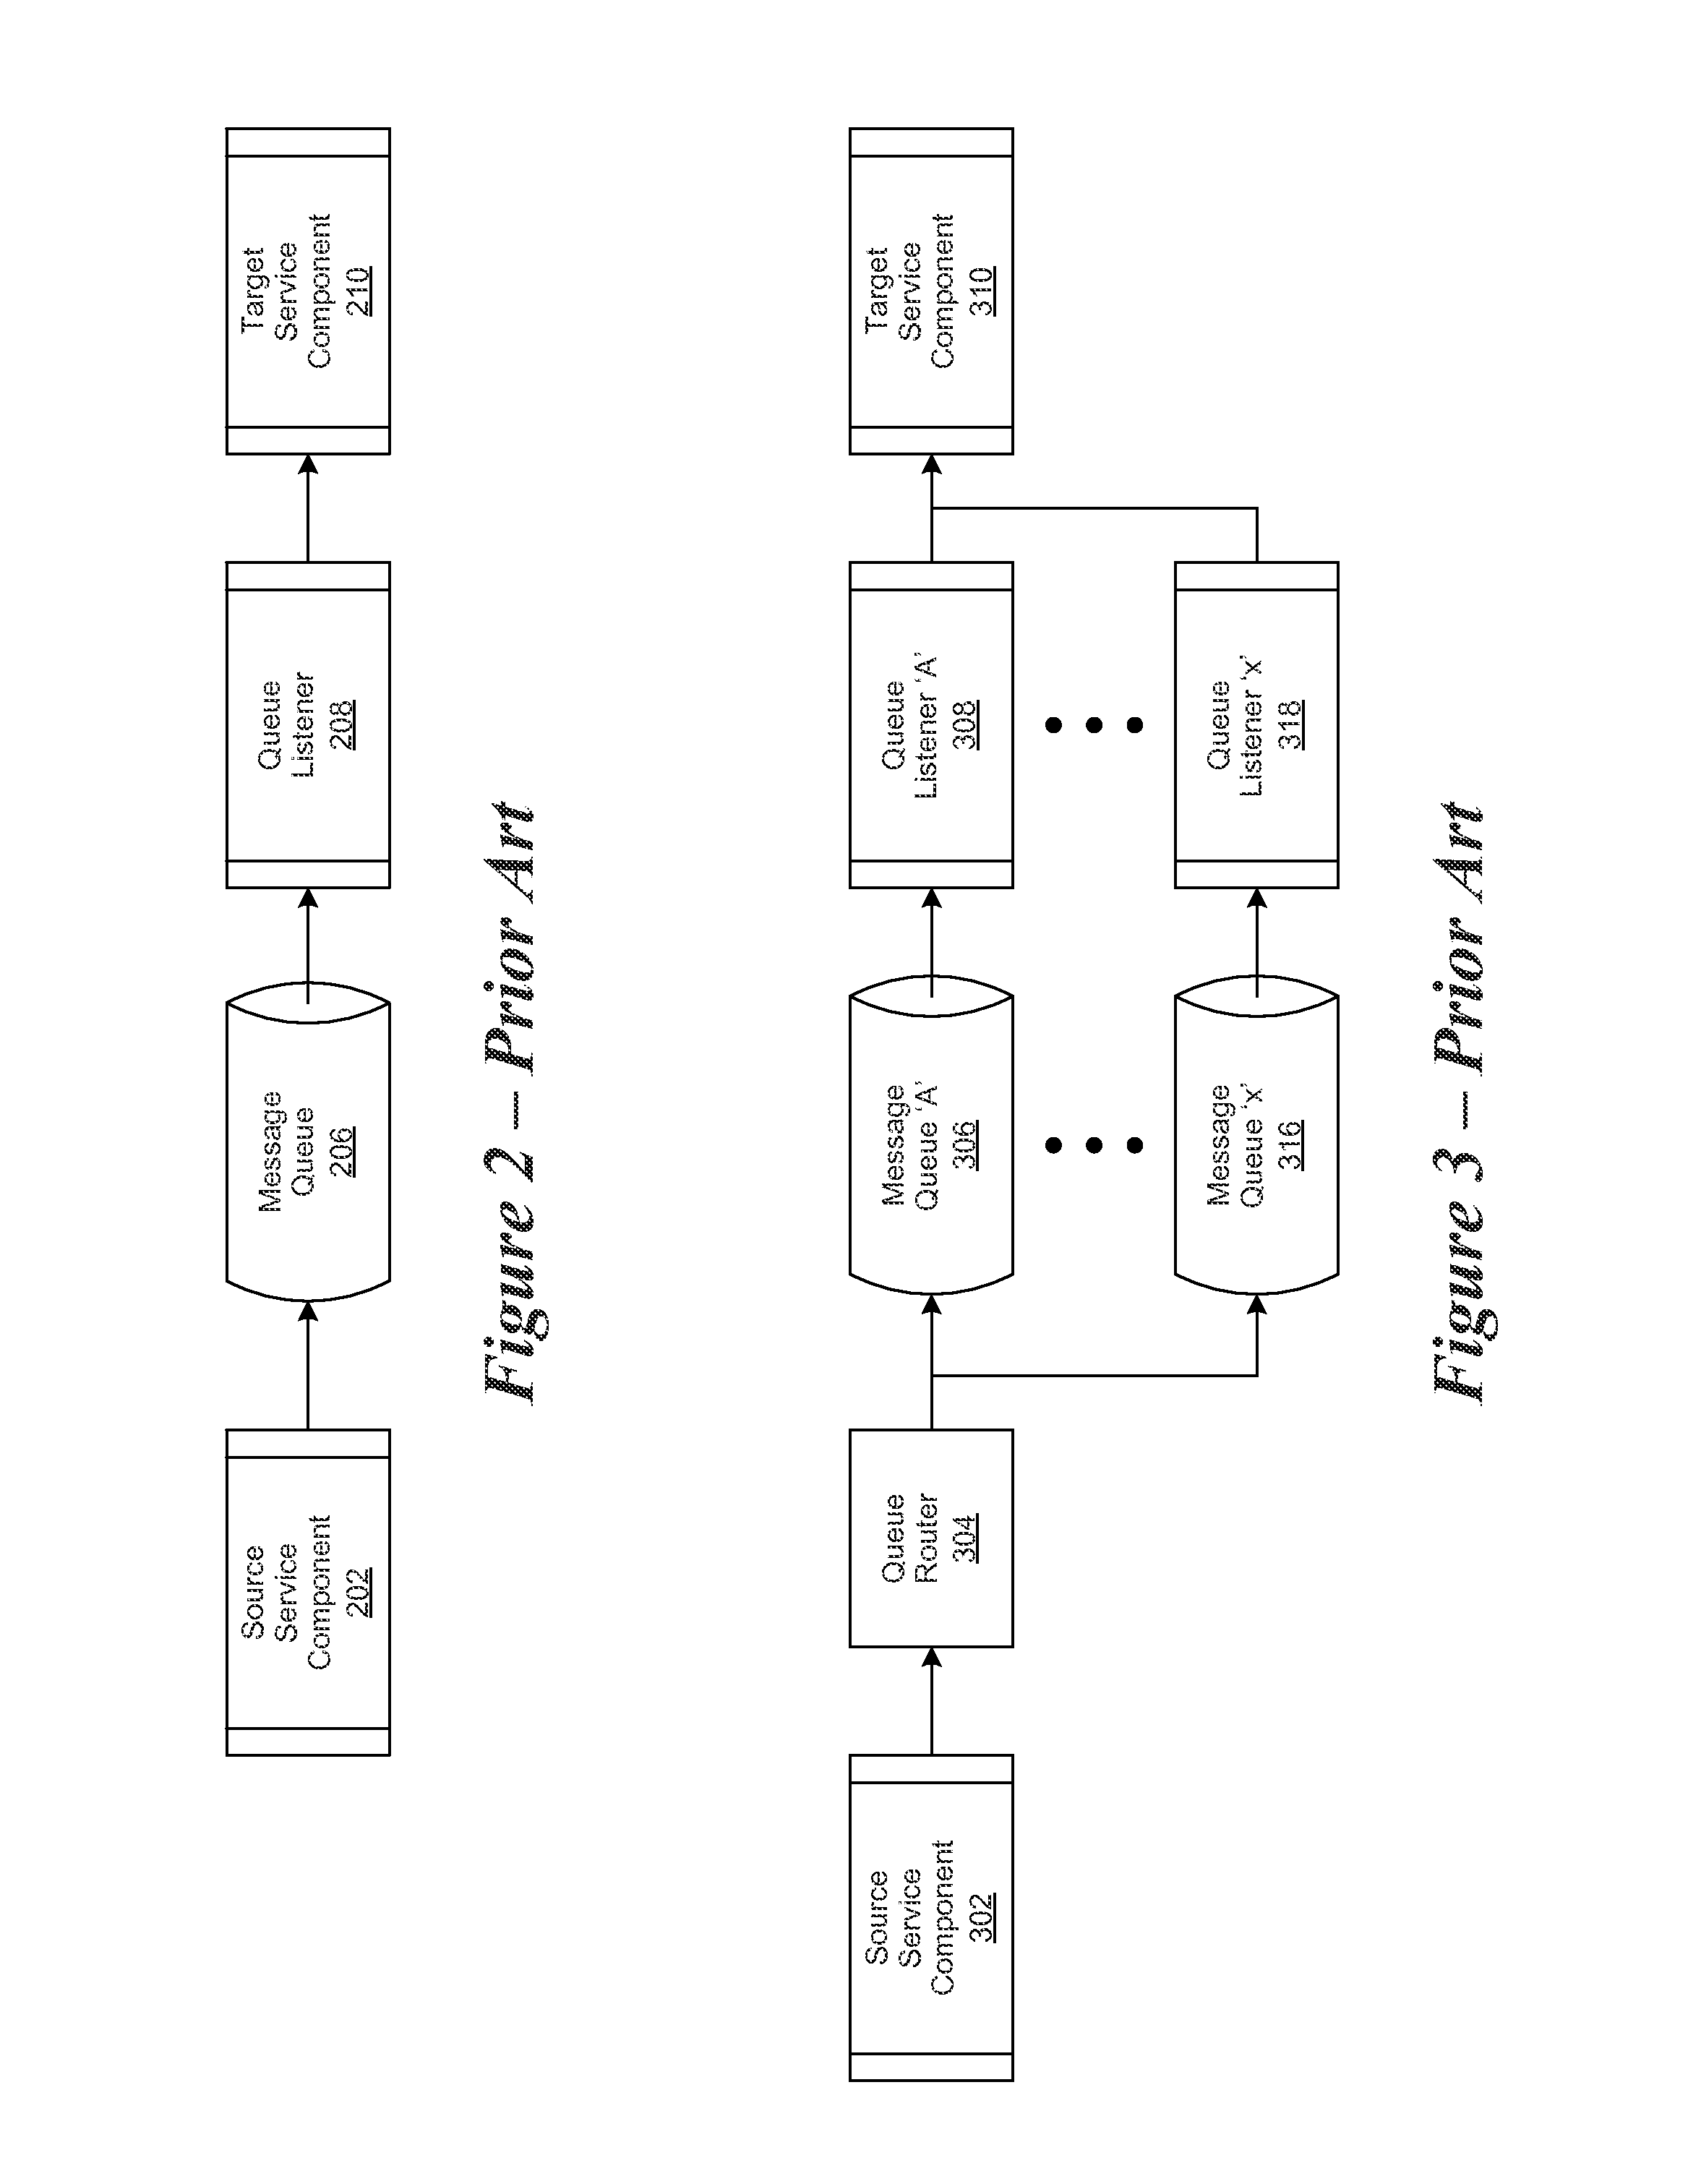 Message Processing Using Dynamic Load Balancing Queues in a Messaging System